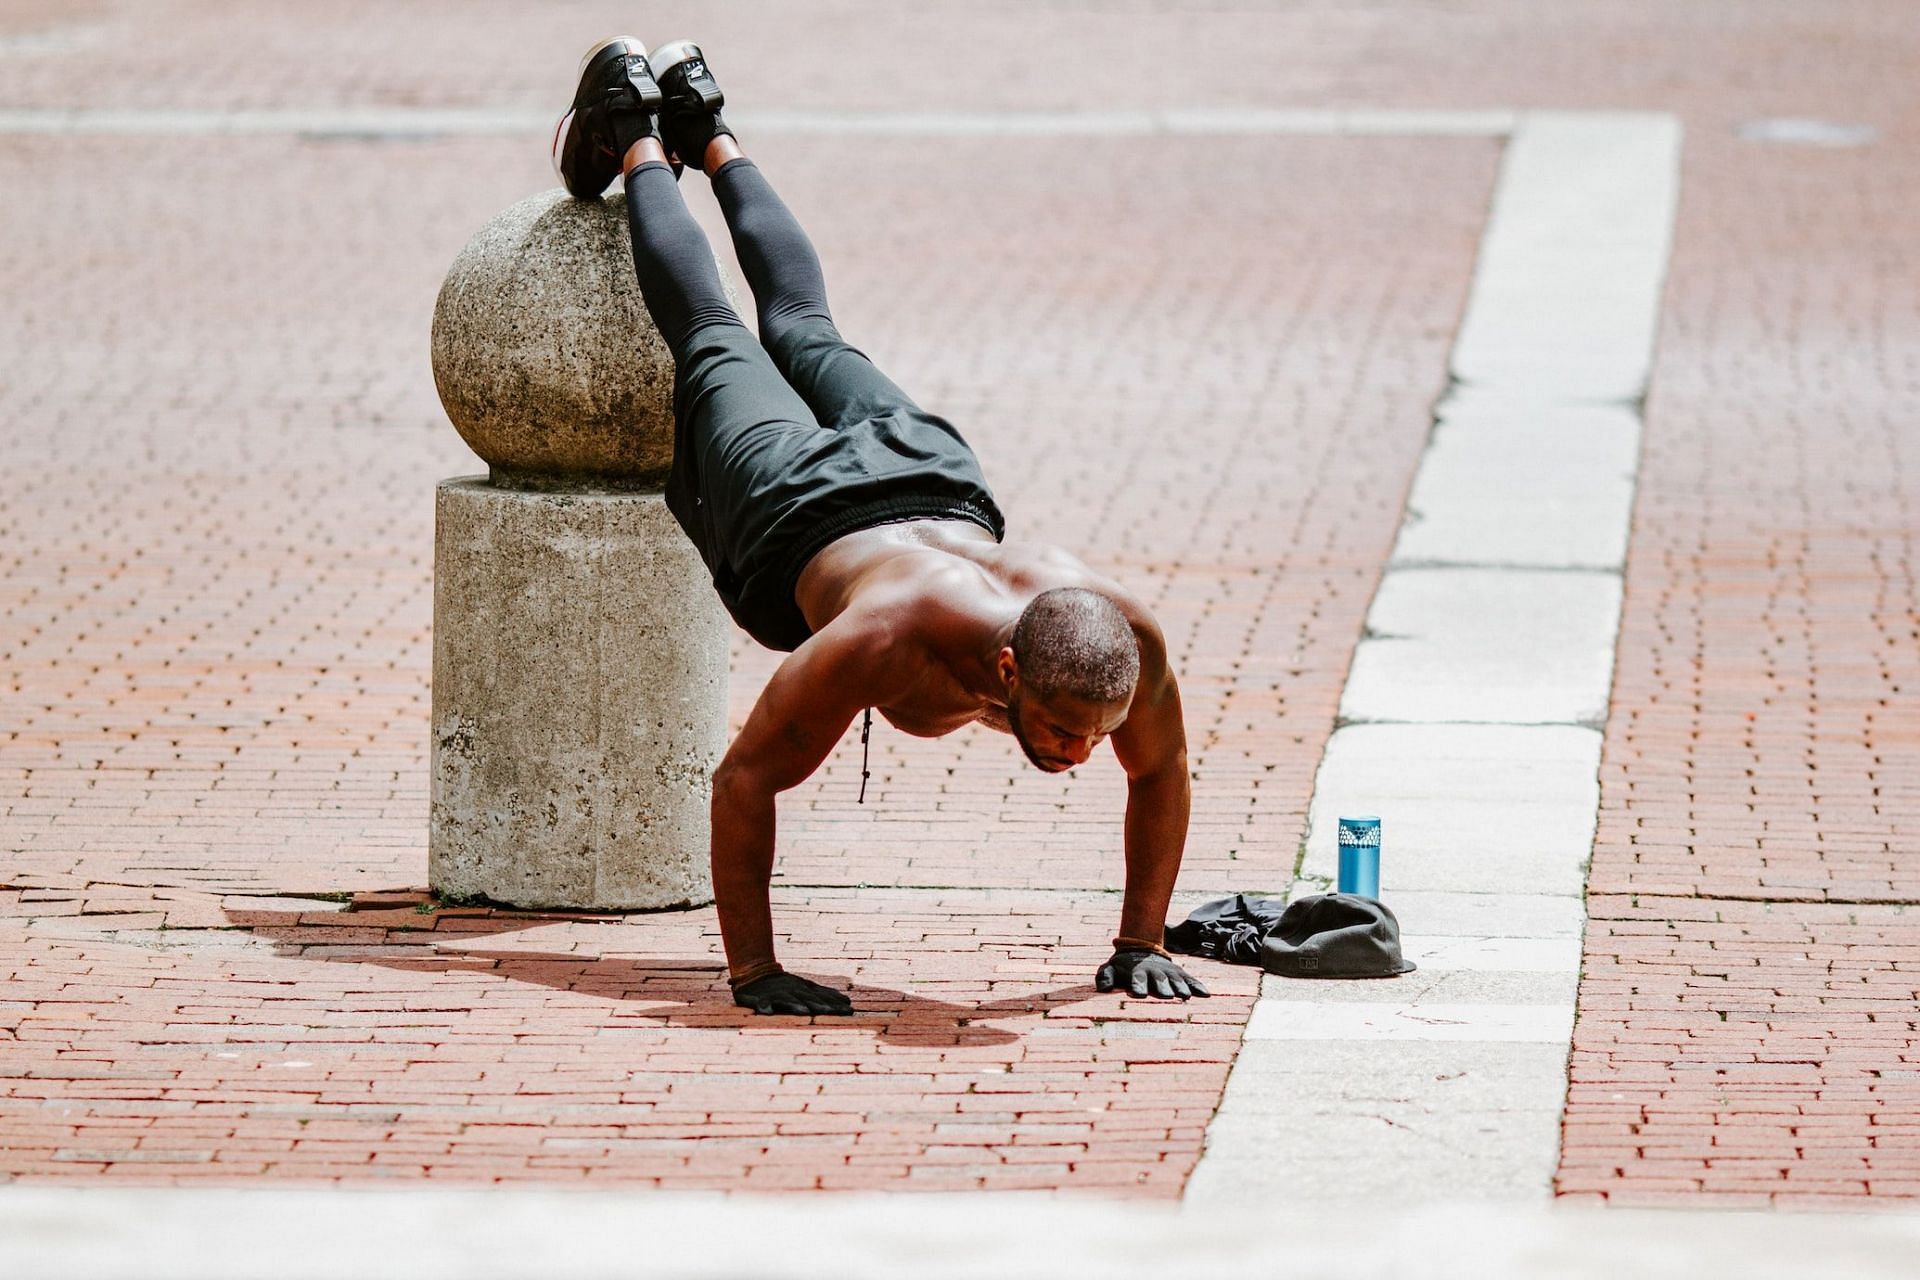 Pike push-ups can help you target your shoulders and triceps (Gabe Pierce /Unsplash)